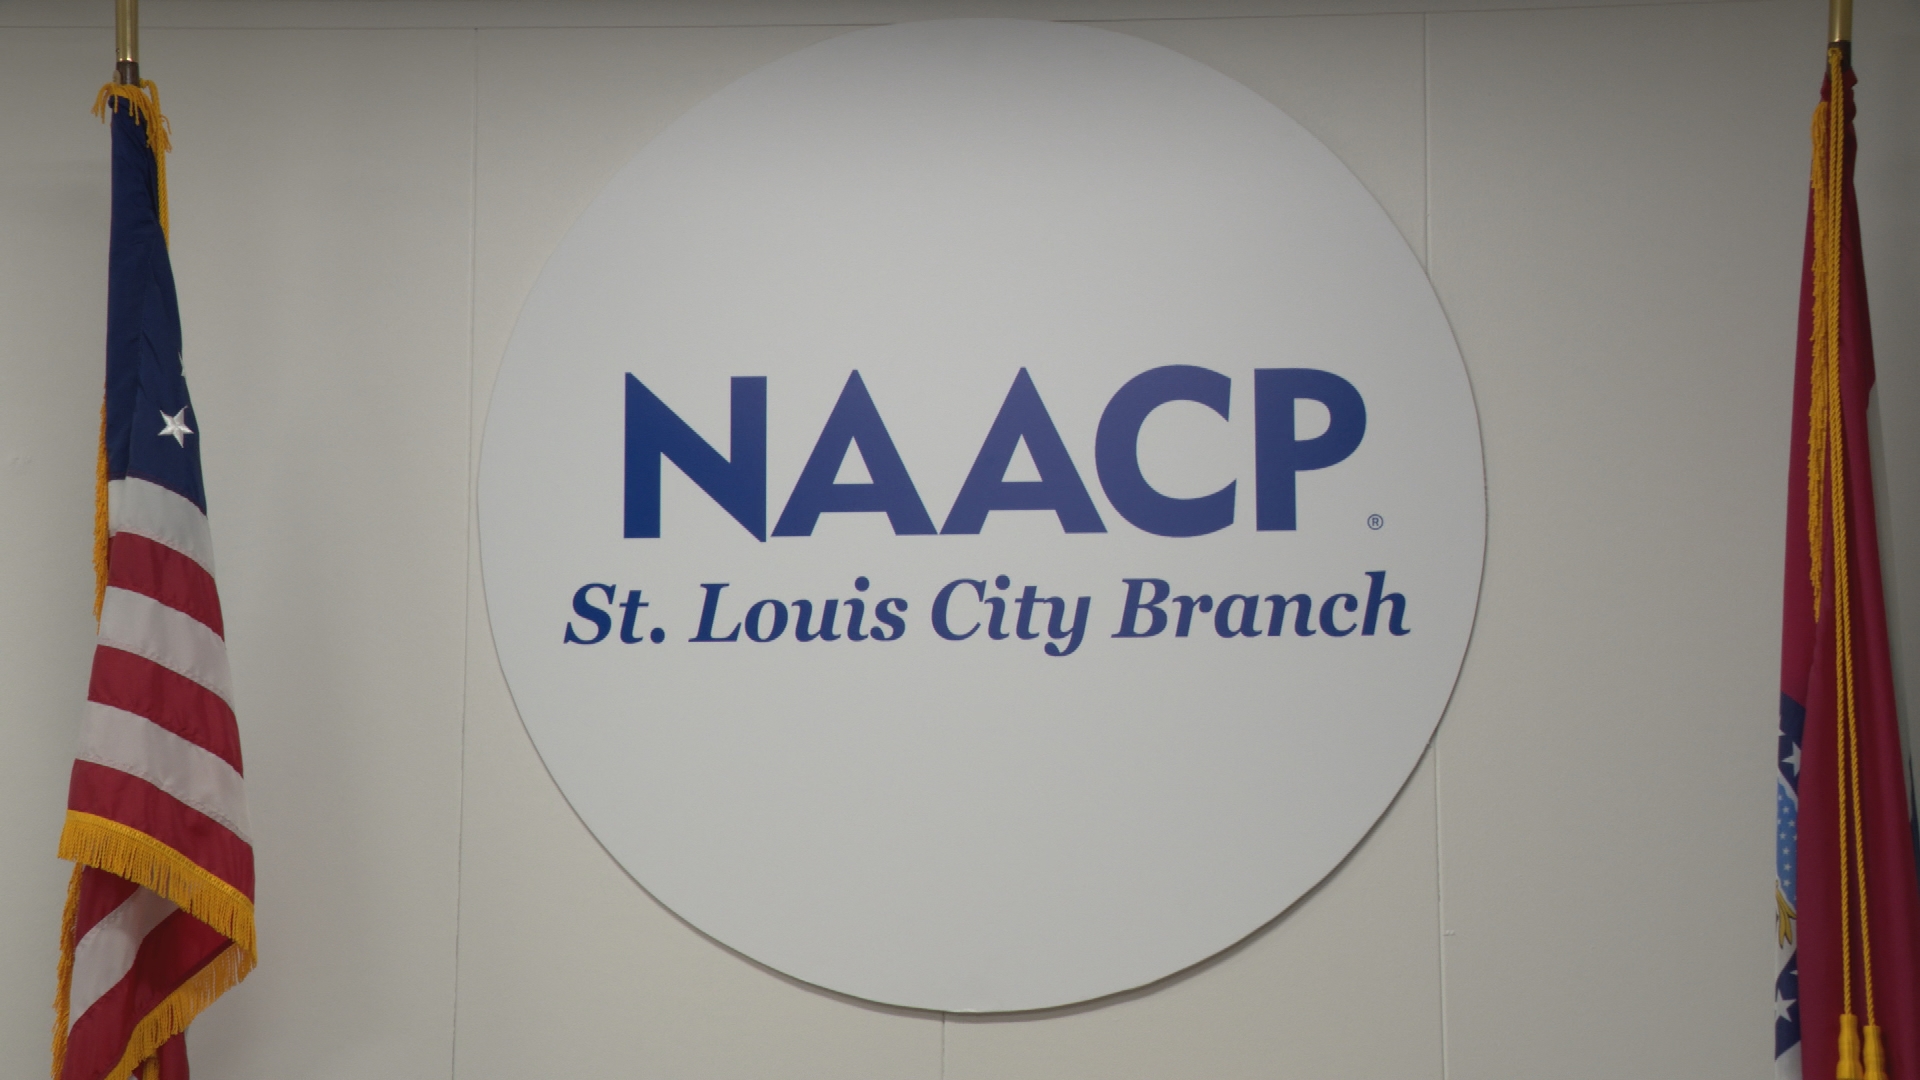 The auditor plans to release the report this year with or without Kim Gardner's help. The NAACP St. Louis Branch is urging for the immediate release of the audit.